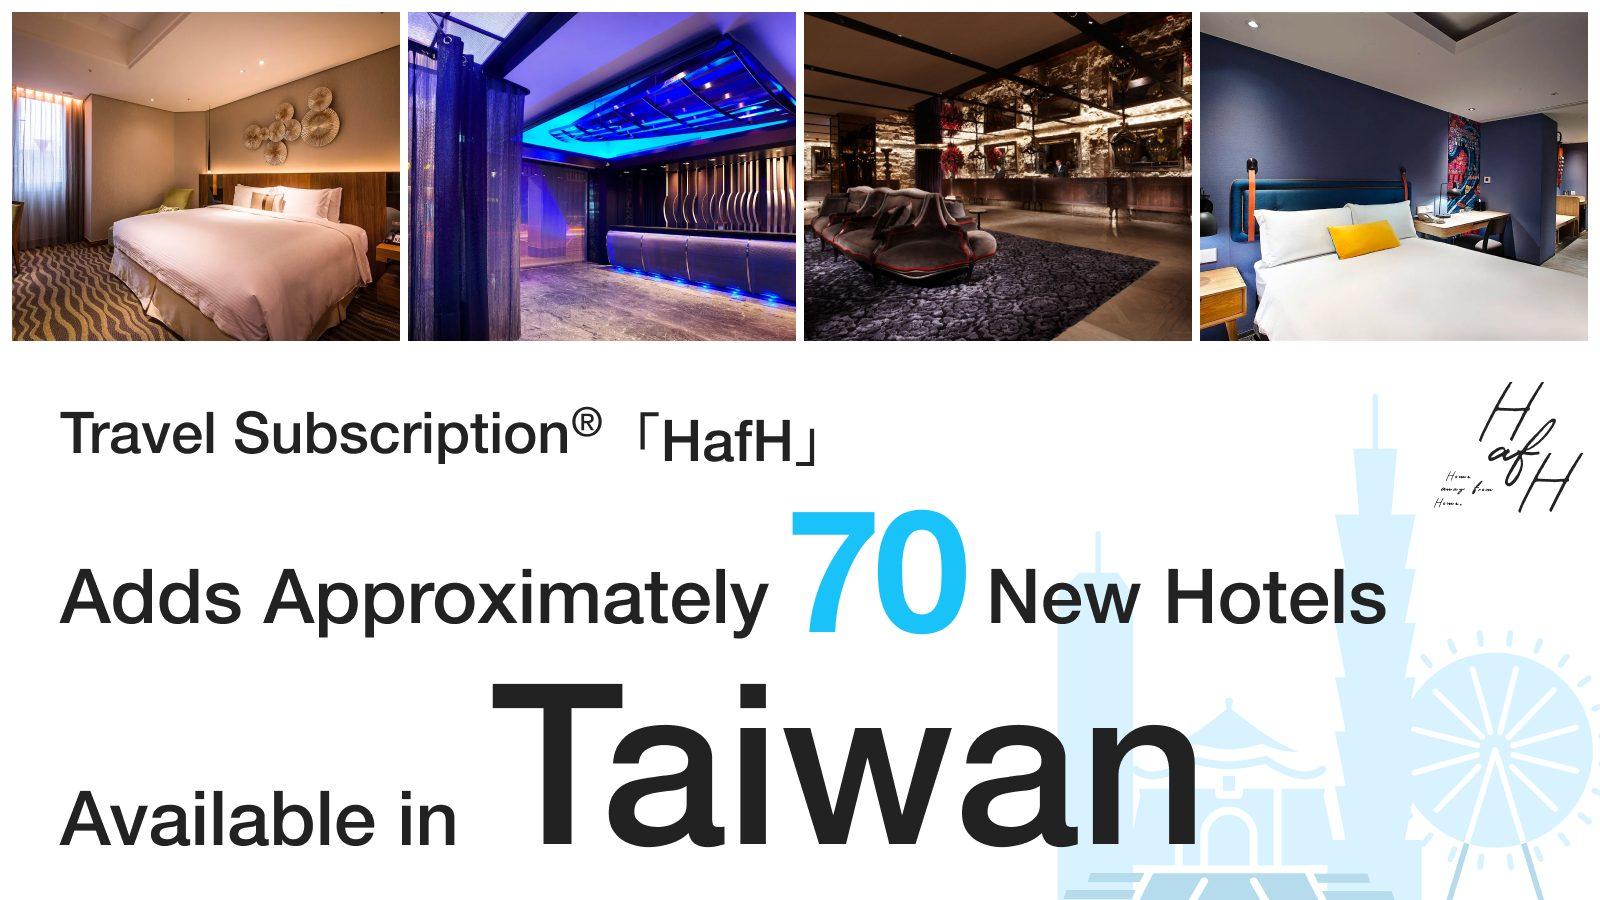 Travel Subscription Service ‘HafH’ Adds Approximately 70 New Hotels Available in Taiwan